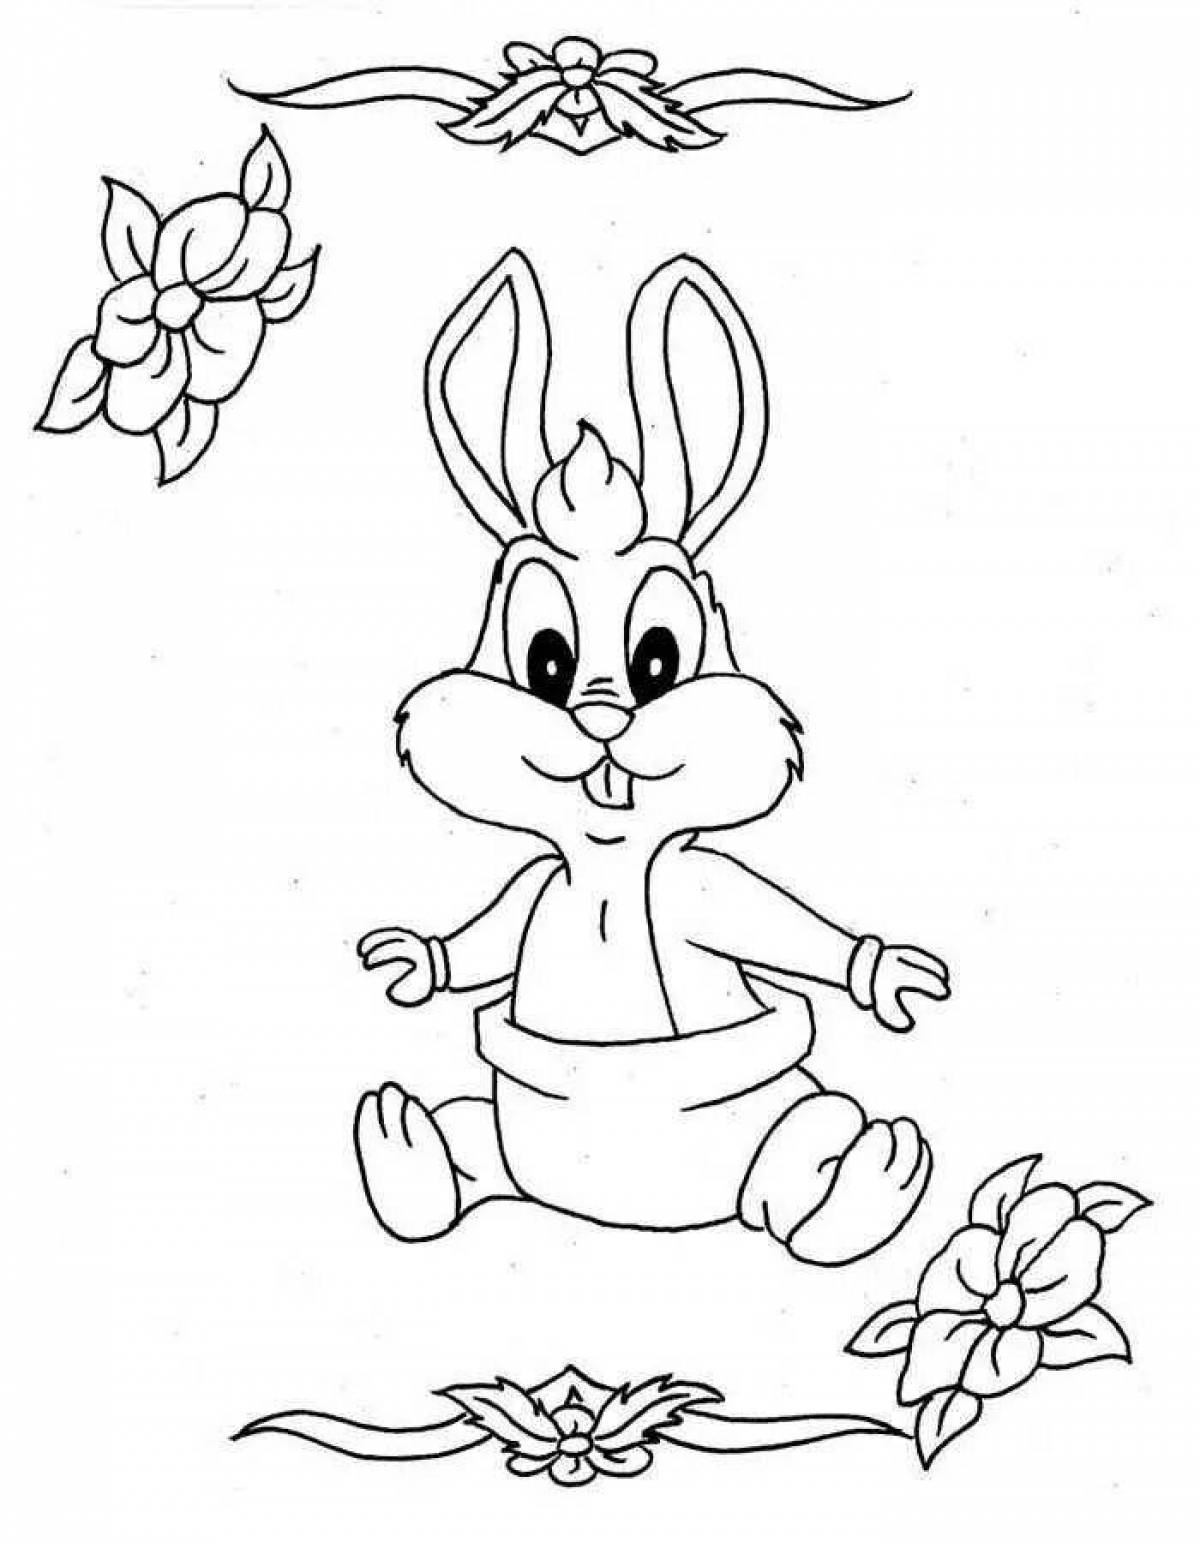 A funny drawing of a rabbit coloring book